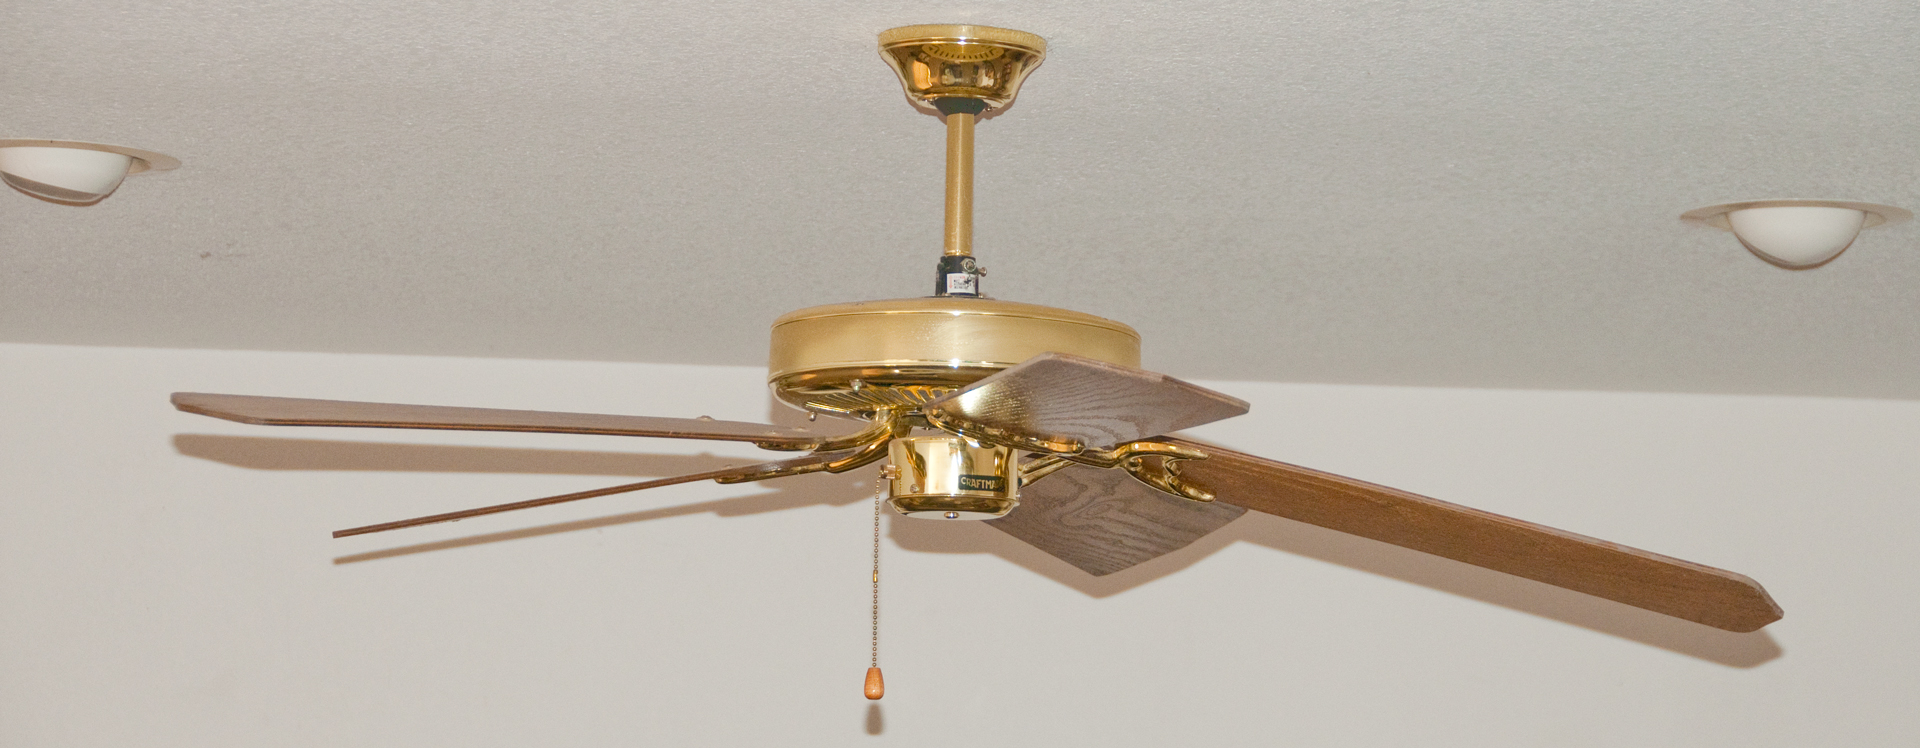 Ceiling Fan Old Work Box, Ceiling, Free Engine Image For User Manual ...